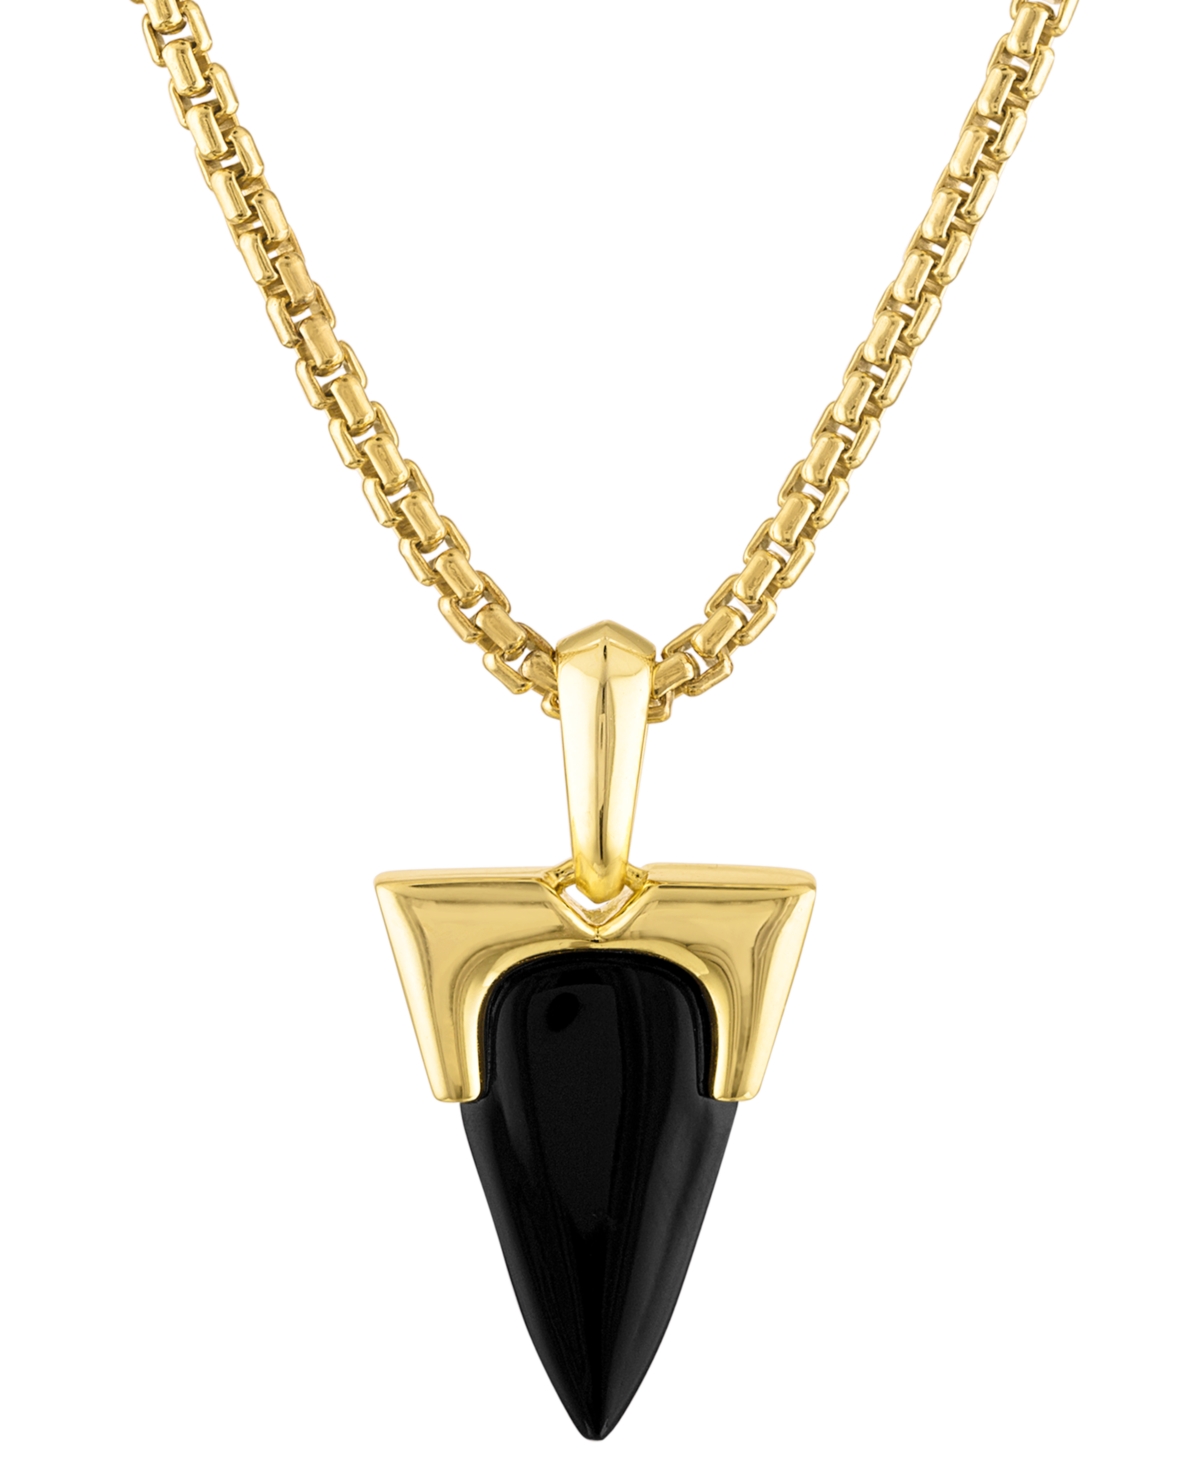 Bulova Men's Icon Black Onyx Pendant Necklace In 14k Gold-plated Sterling Silver, 24" + 2" Extender In Na